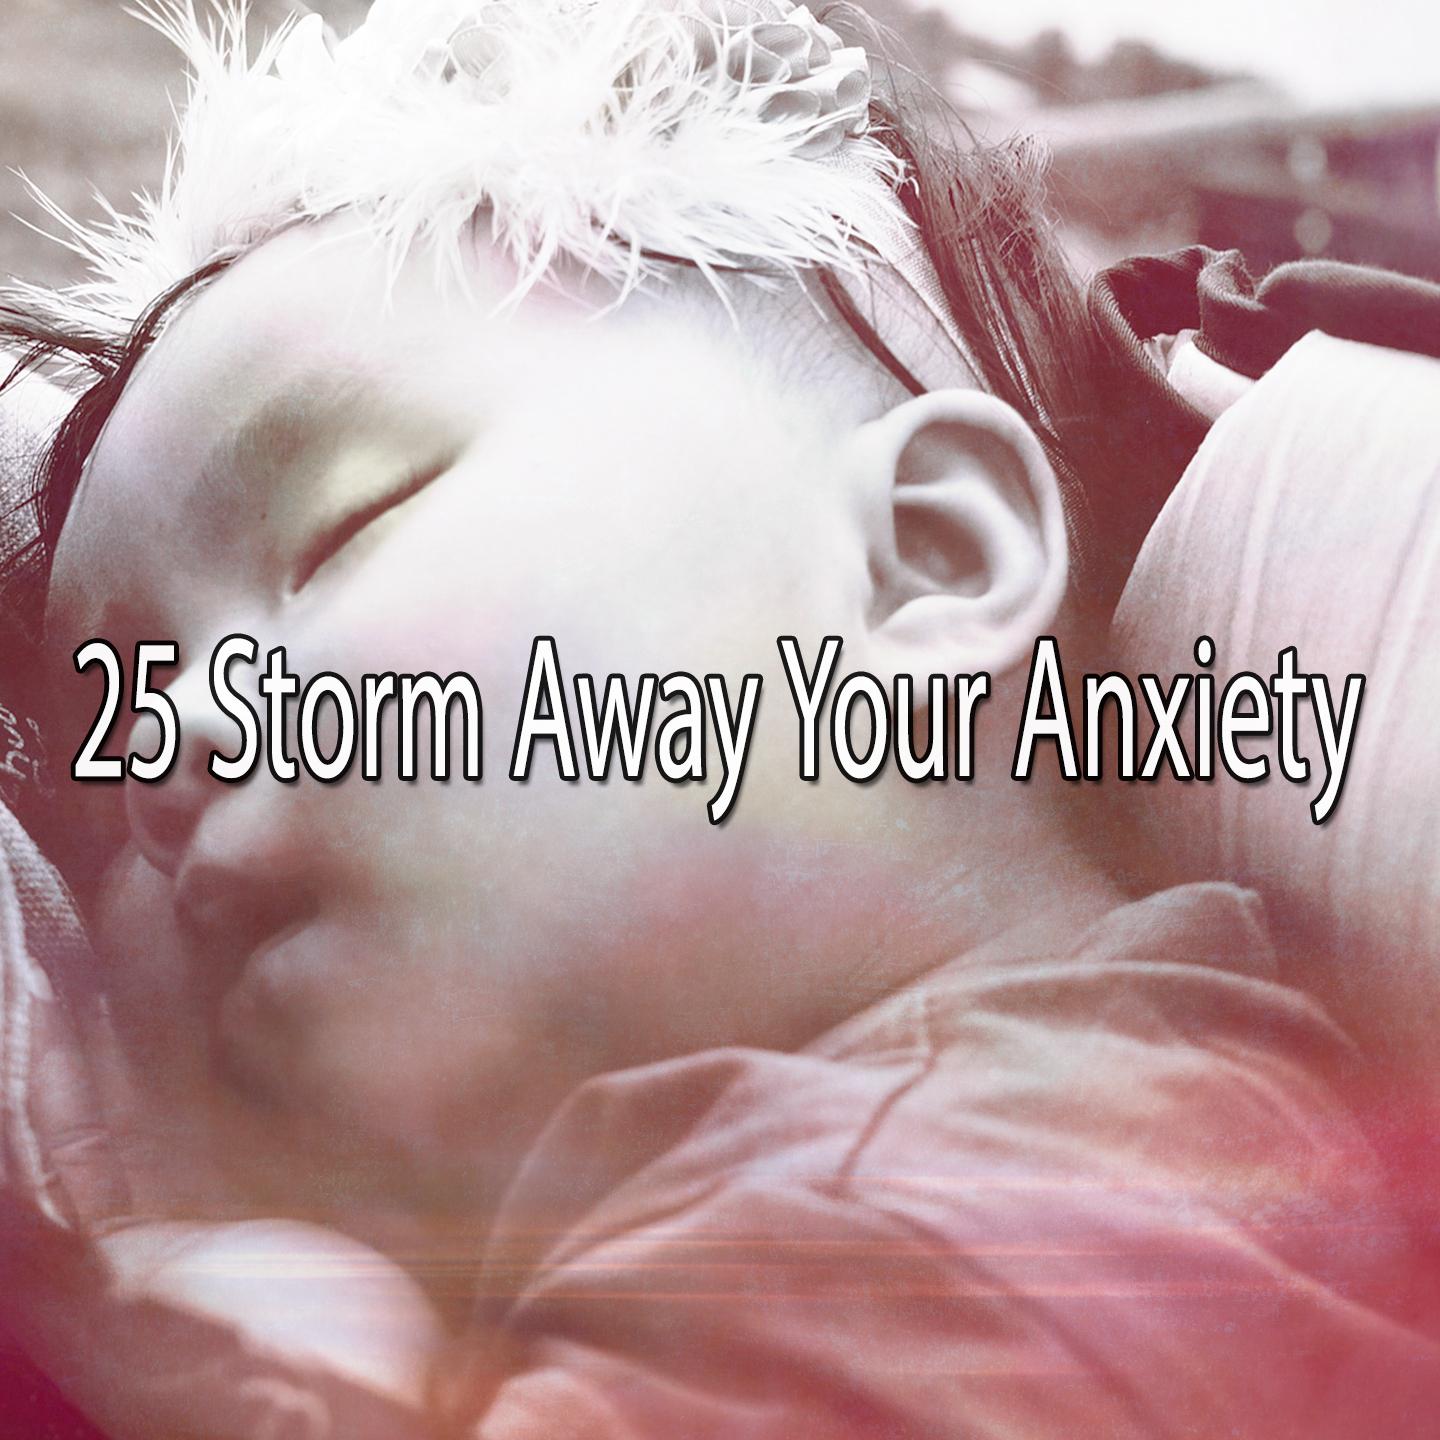 25 Storm Away Your Anxiety